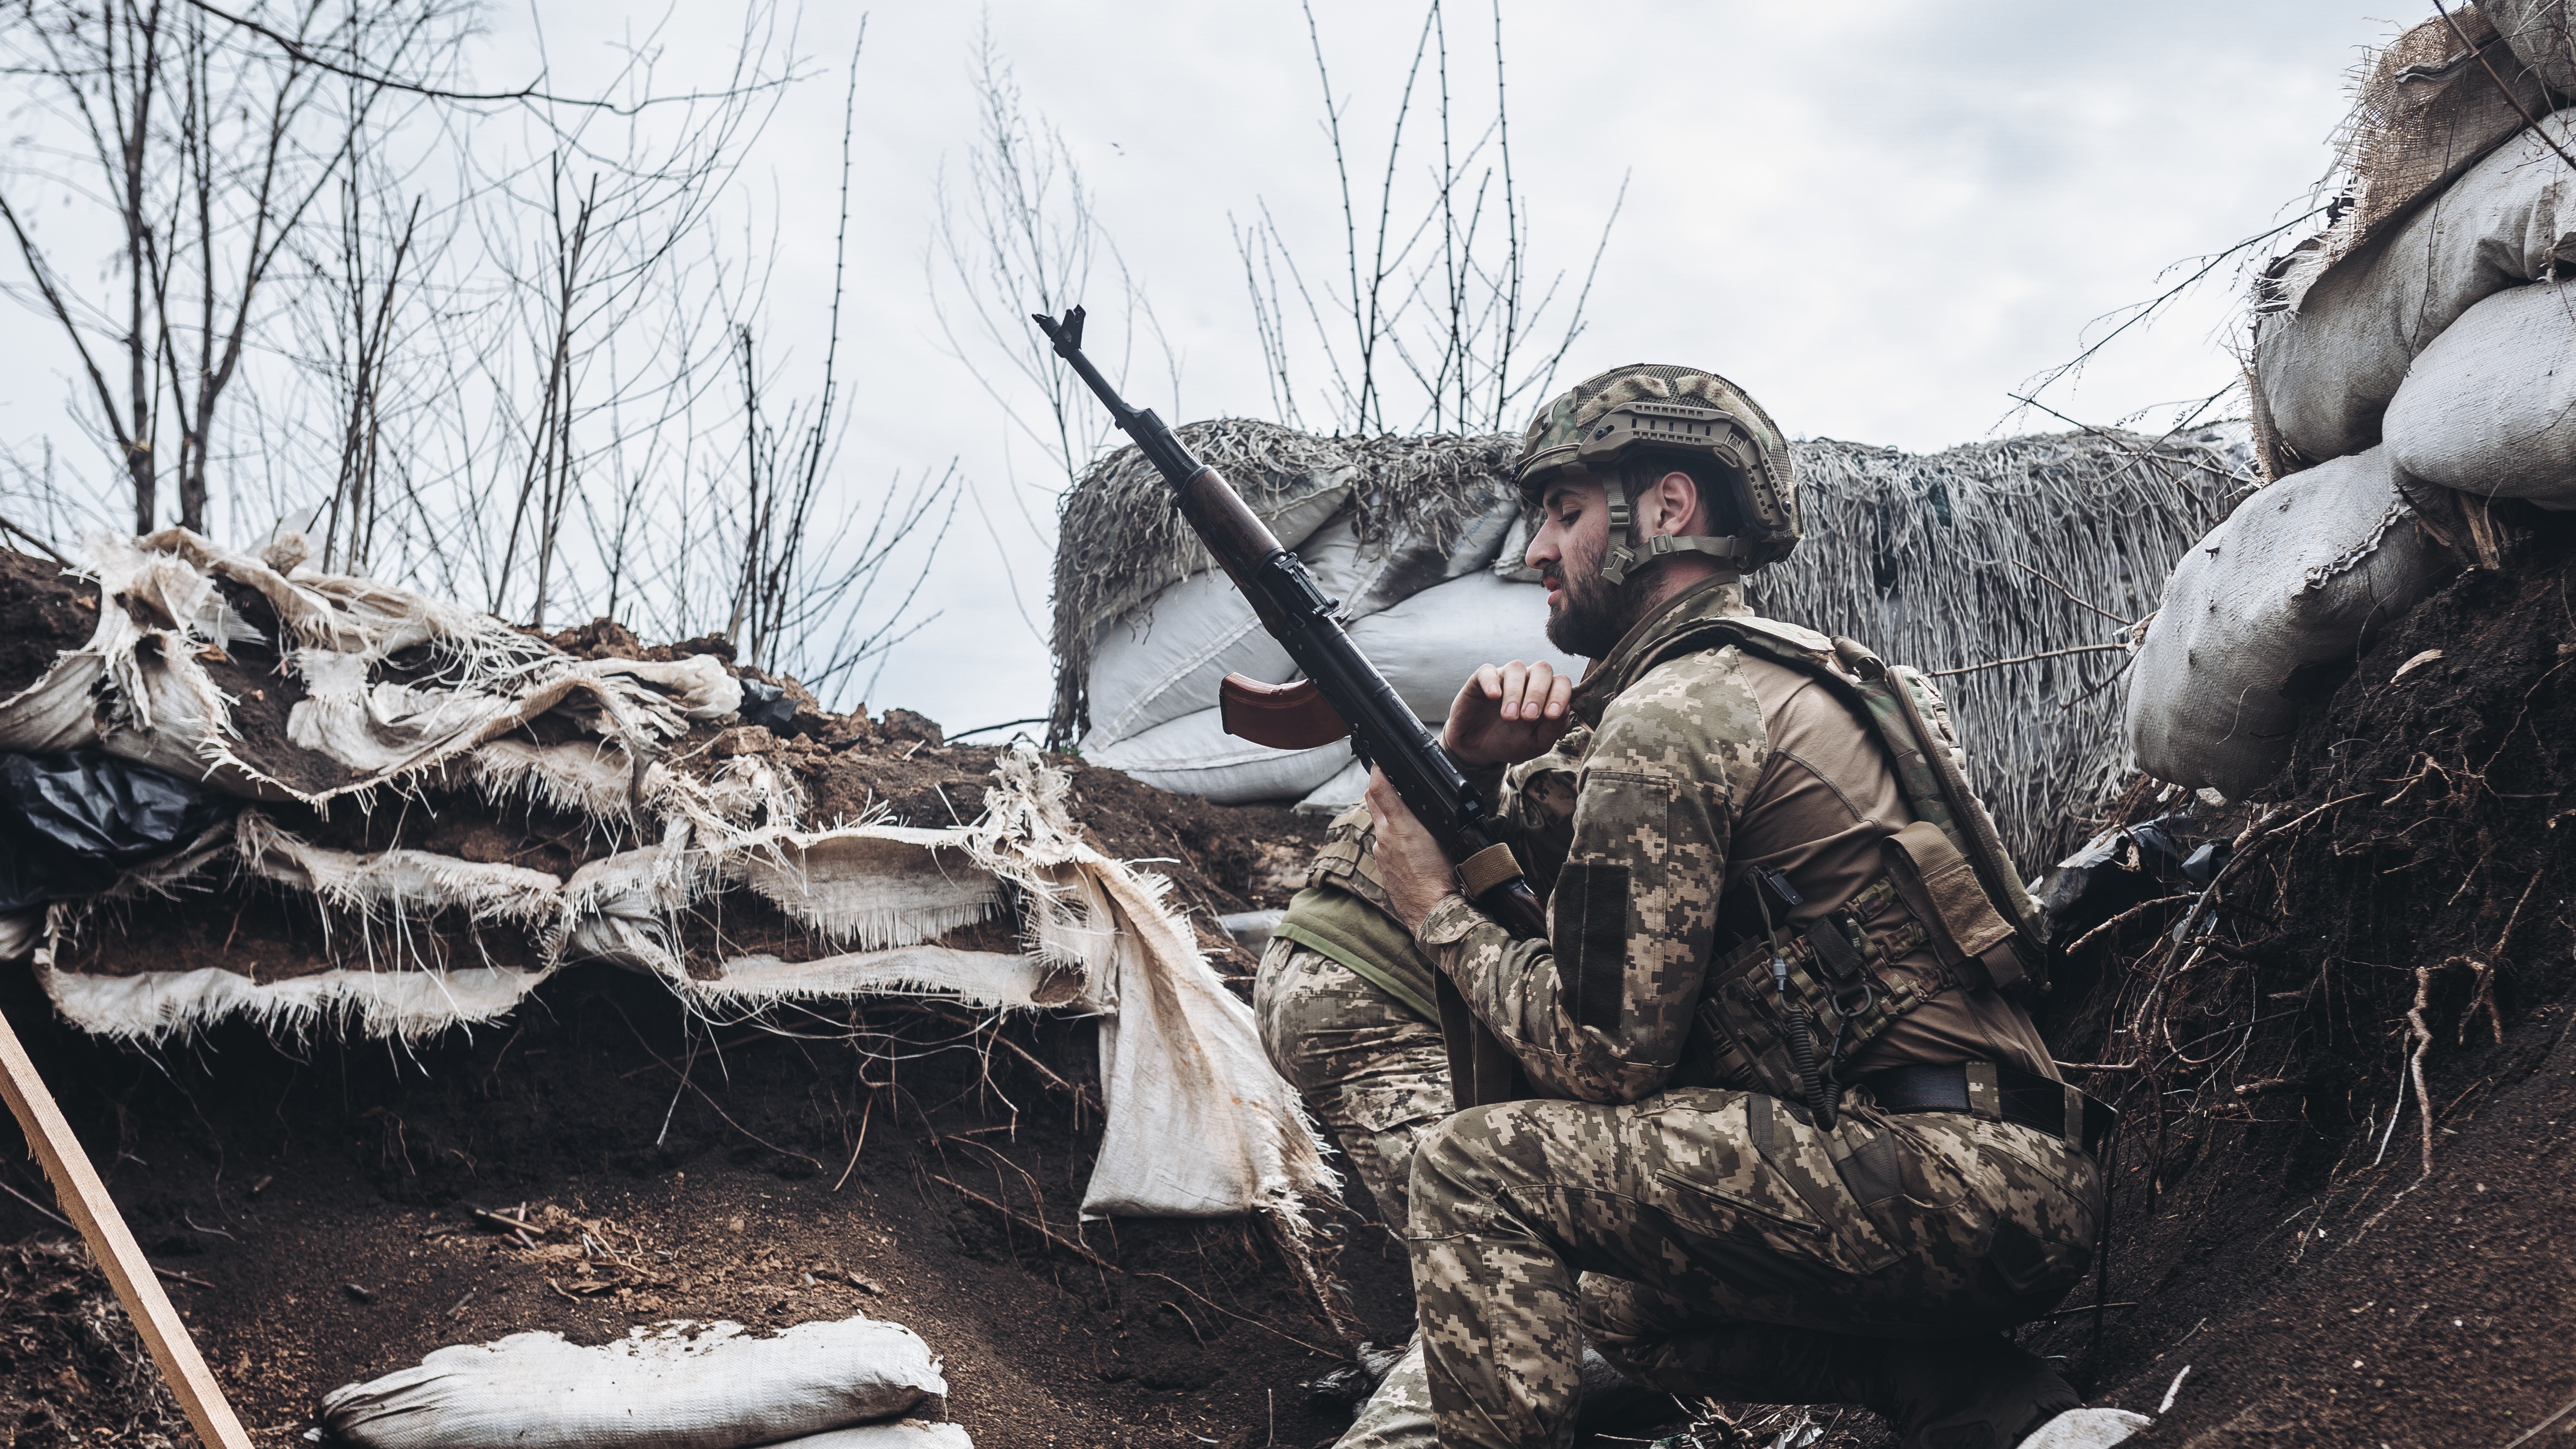 A Ukrainian soldier on the frontline in Donbas